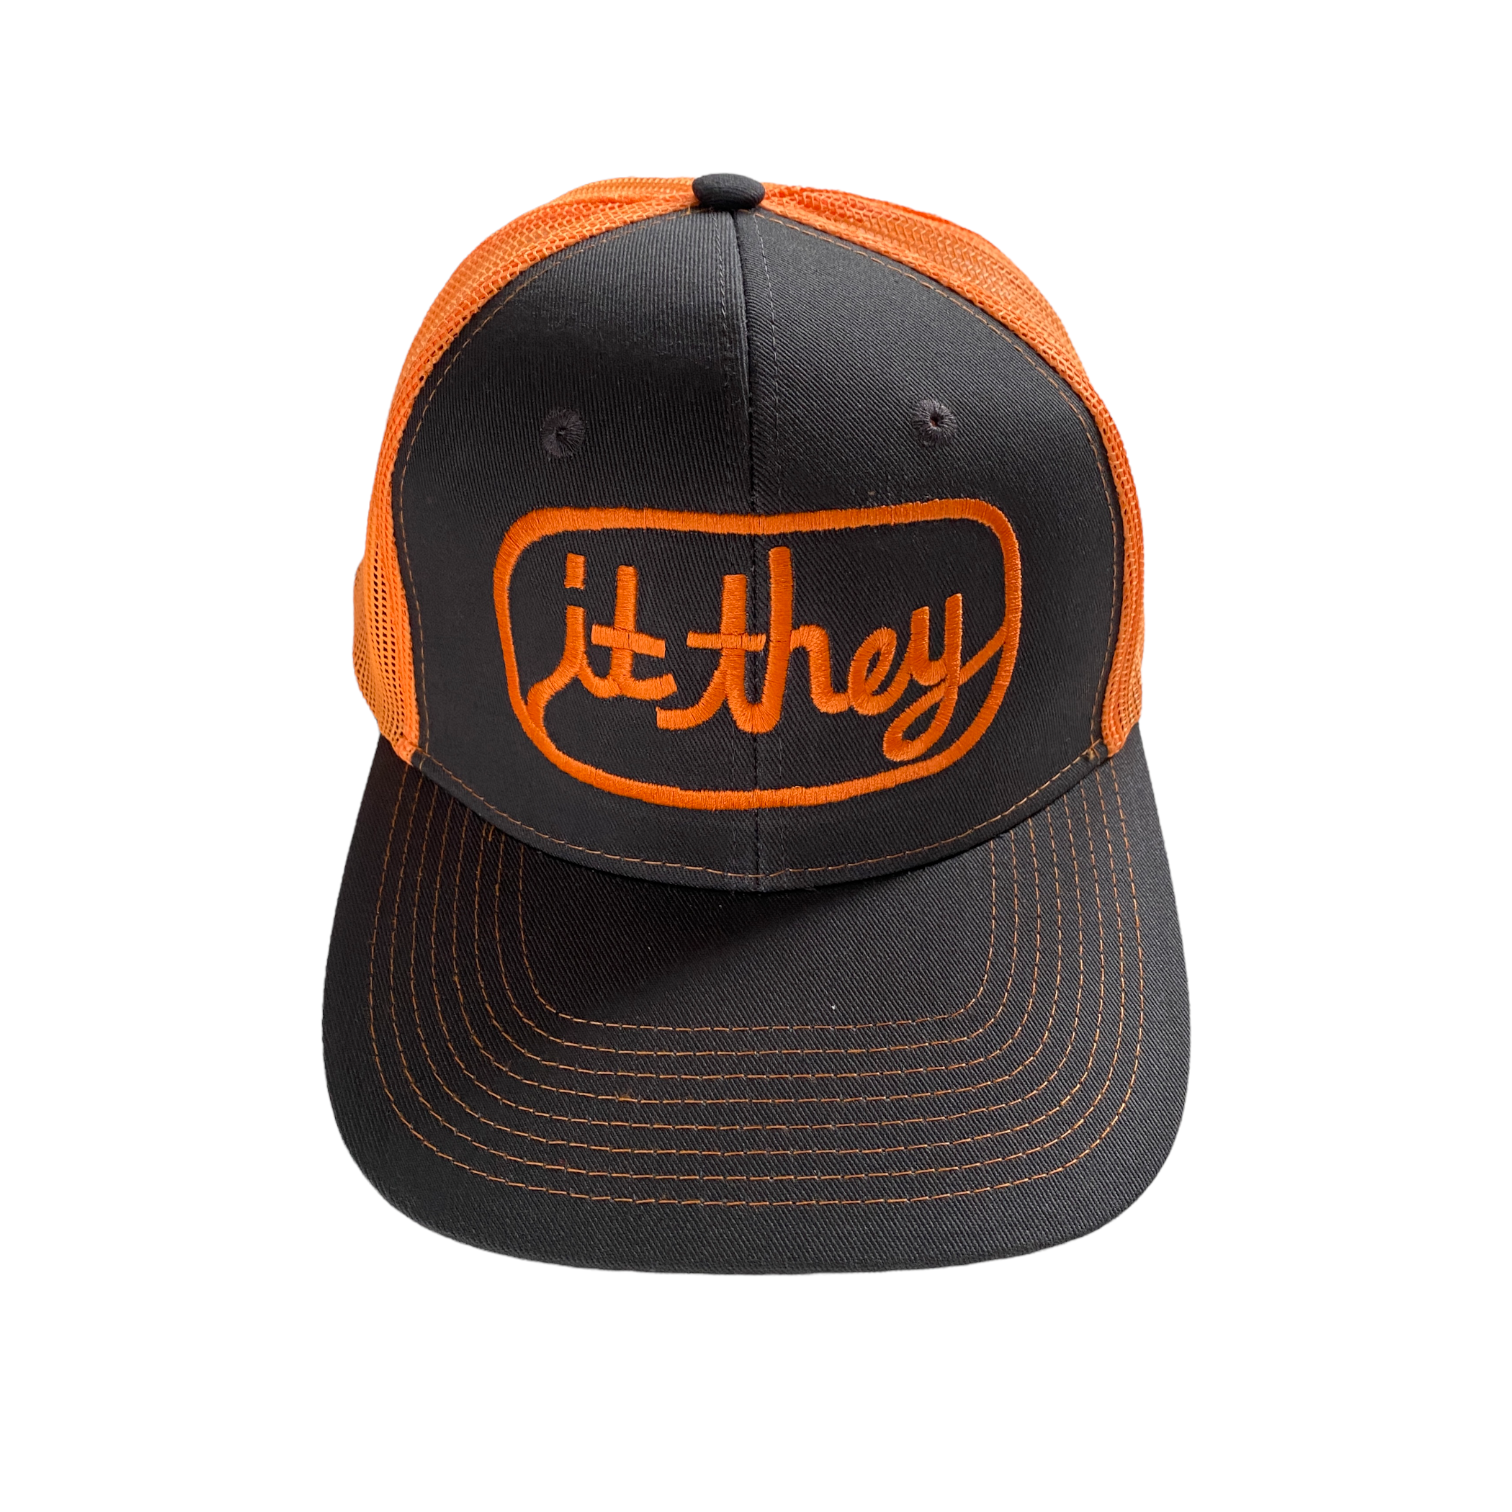 front of neon orange and stone gray trucker hat with orange embroidery reading it they in cursive